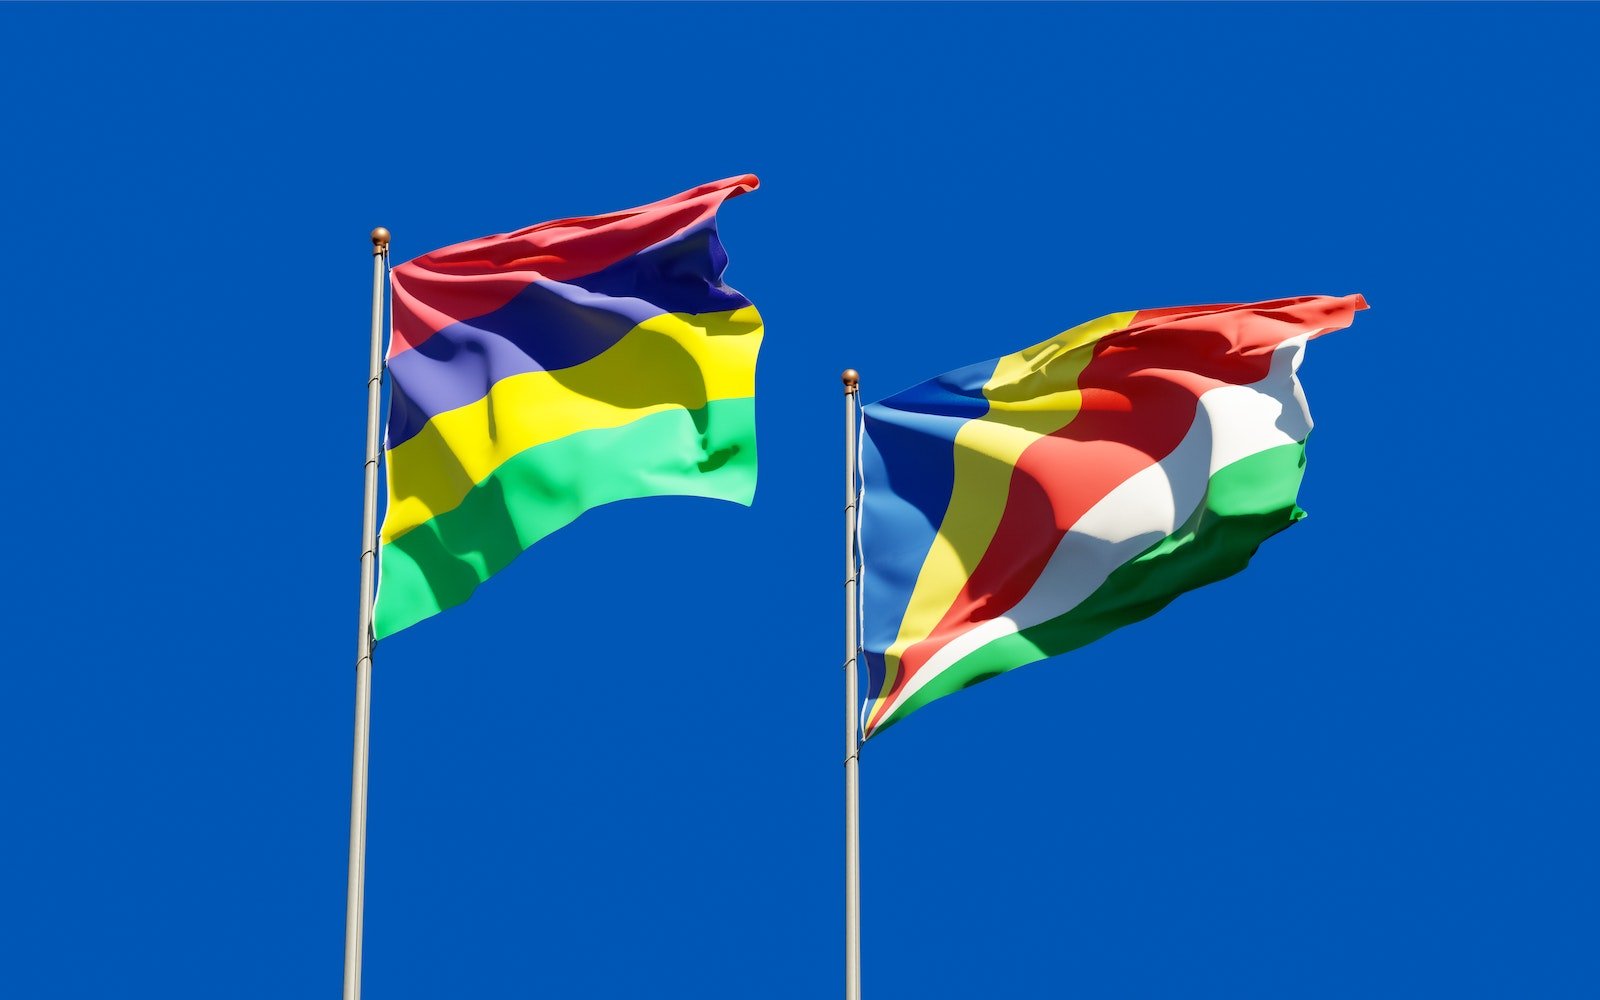 Seychelles and Mauritius Flags Under the Blue Sky